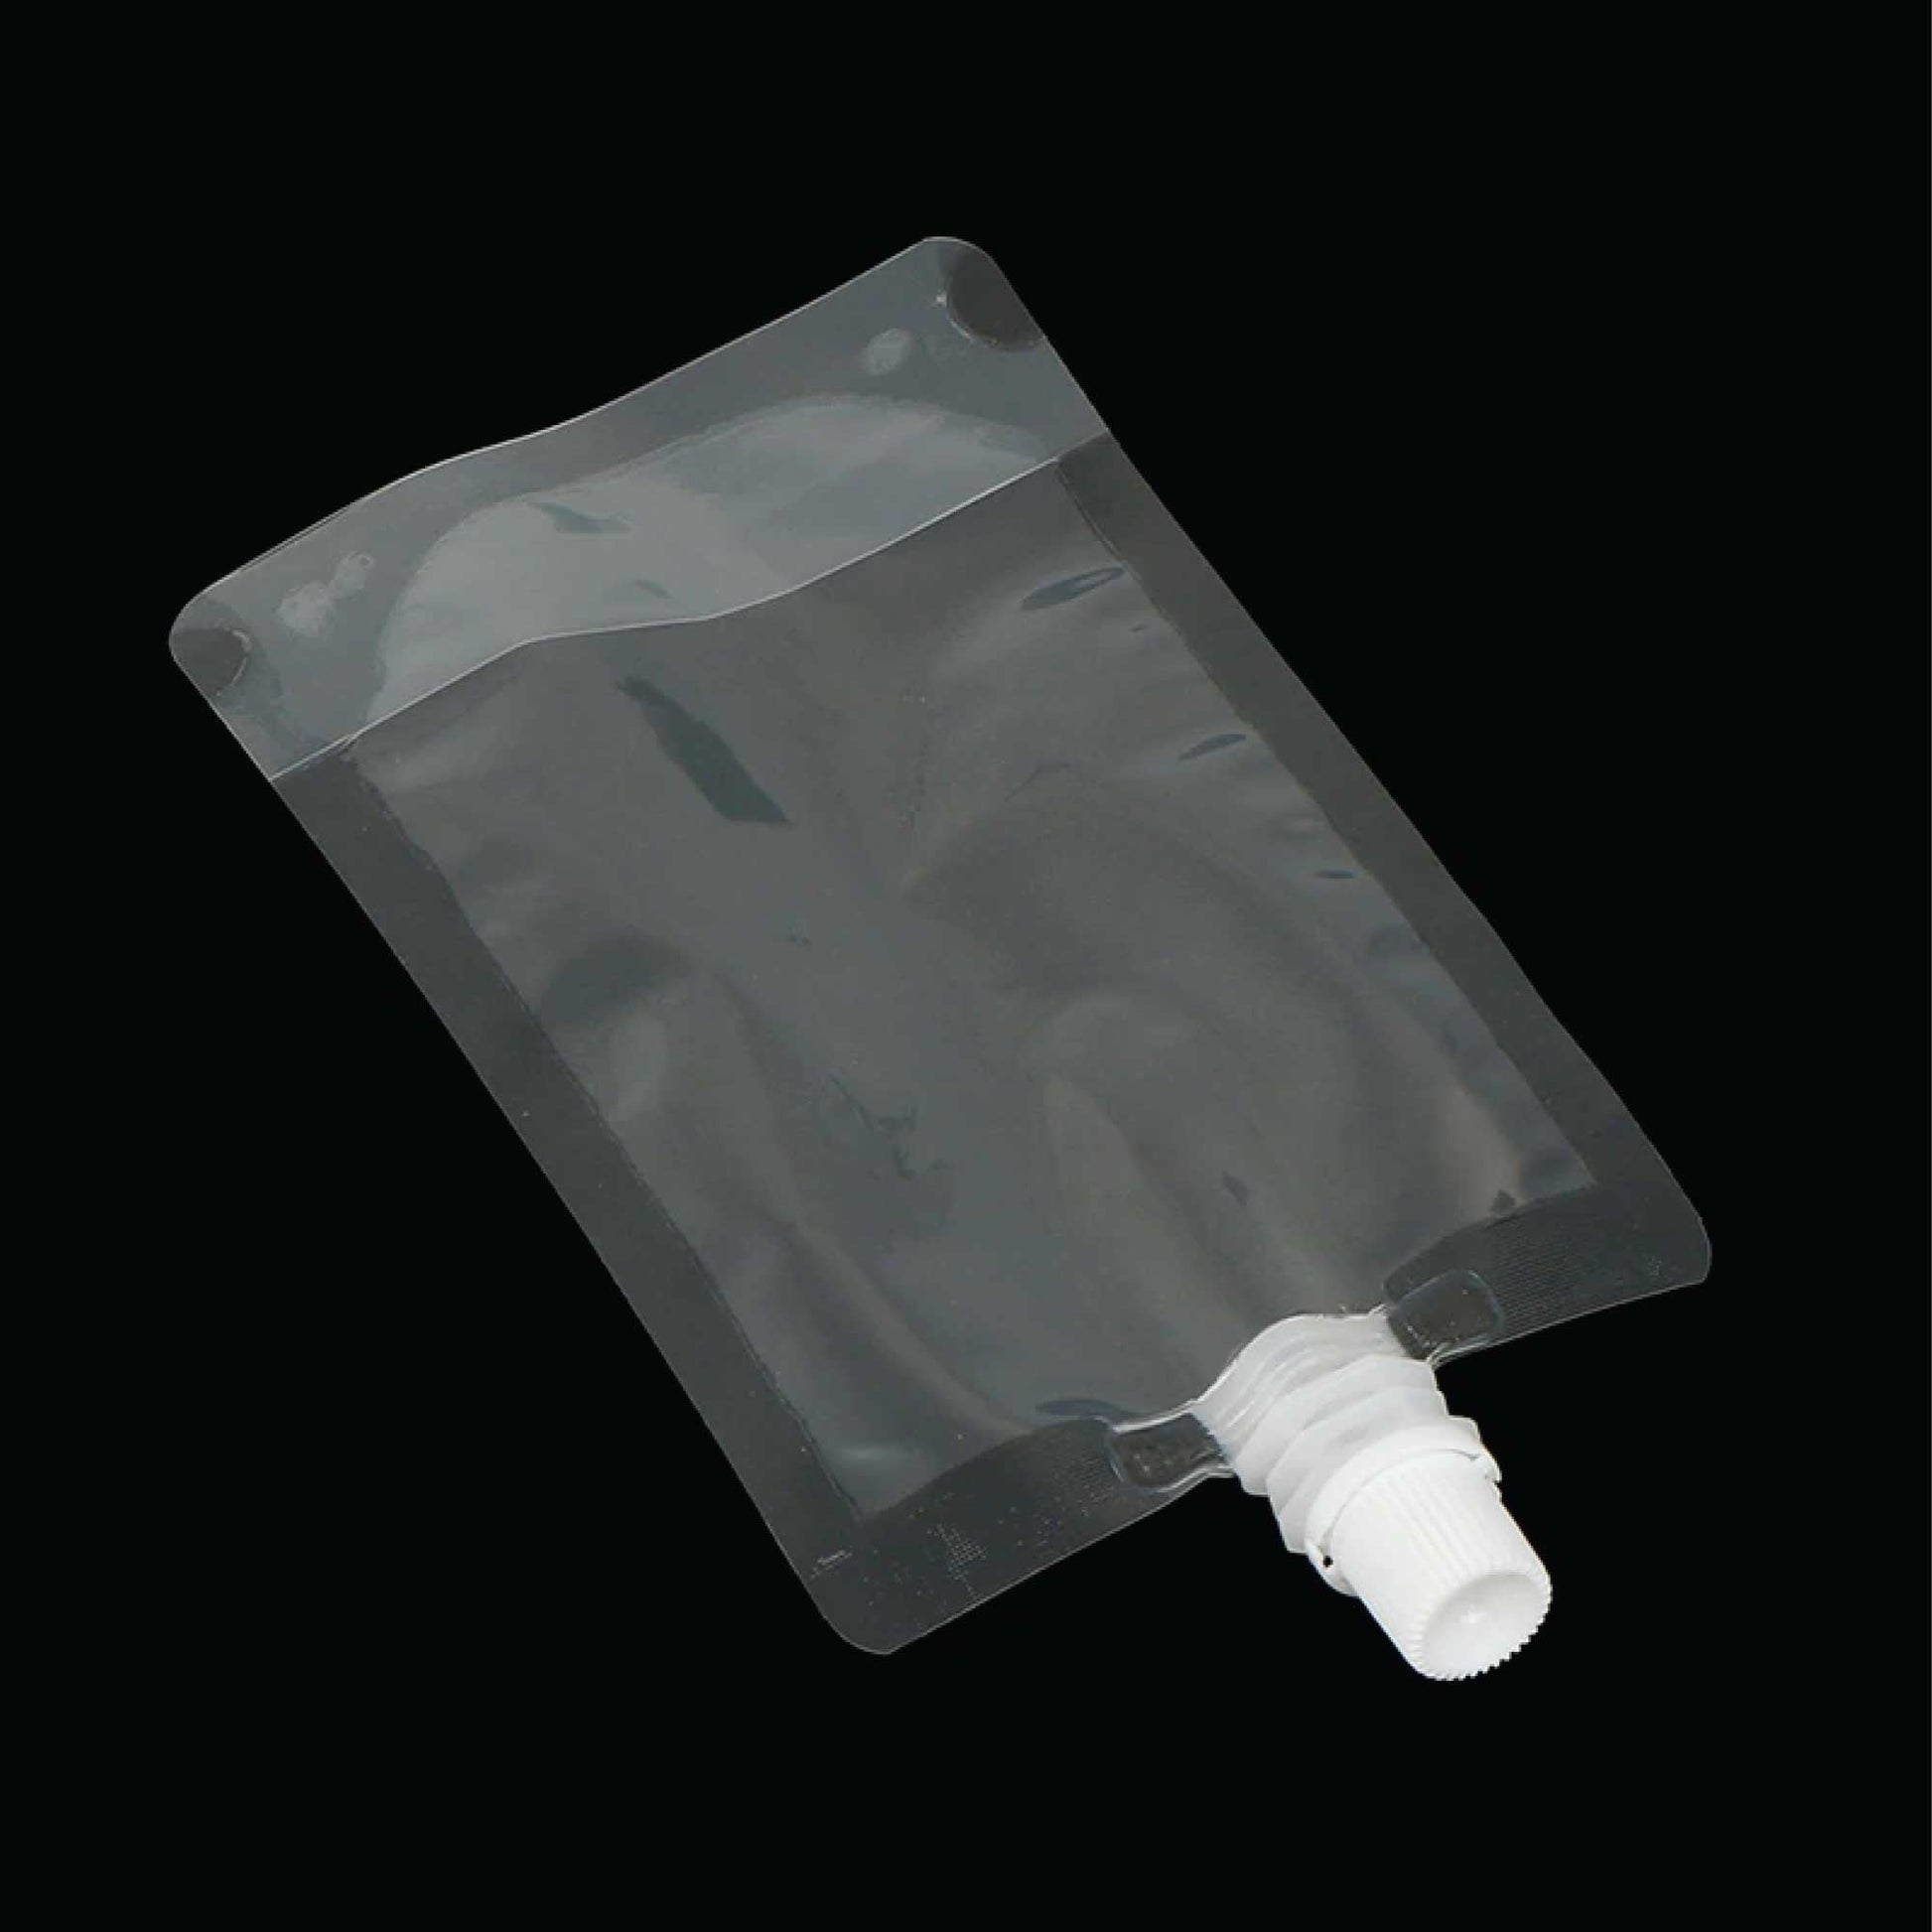 100x Juice Pouches - Stand Up Plastic Empty Drink Bag 100ml 200ml 250ml 500ml